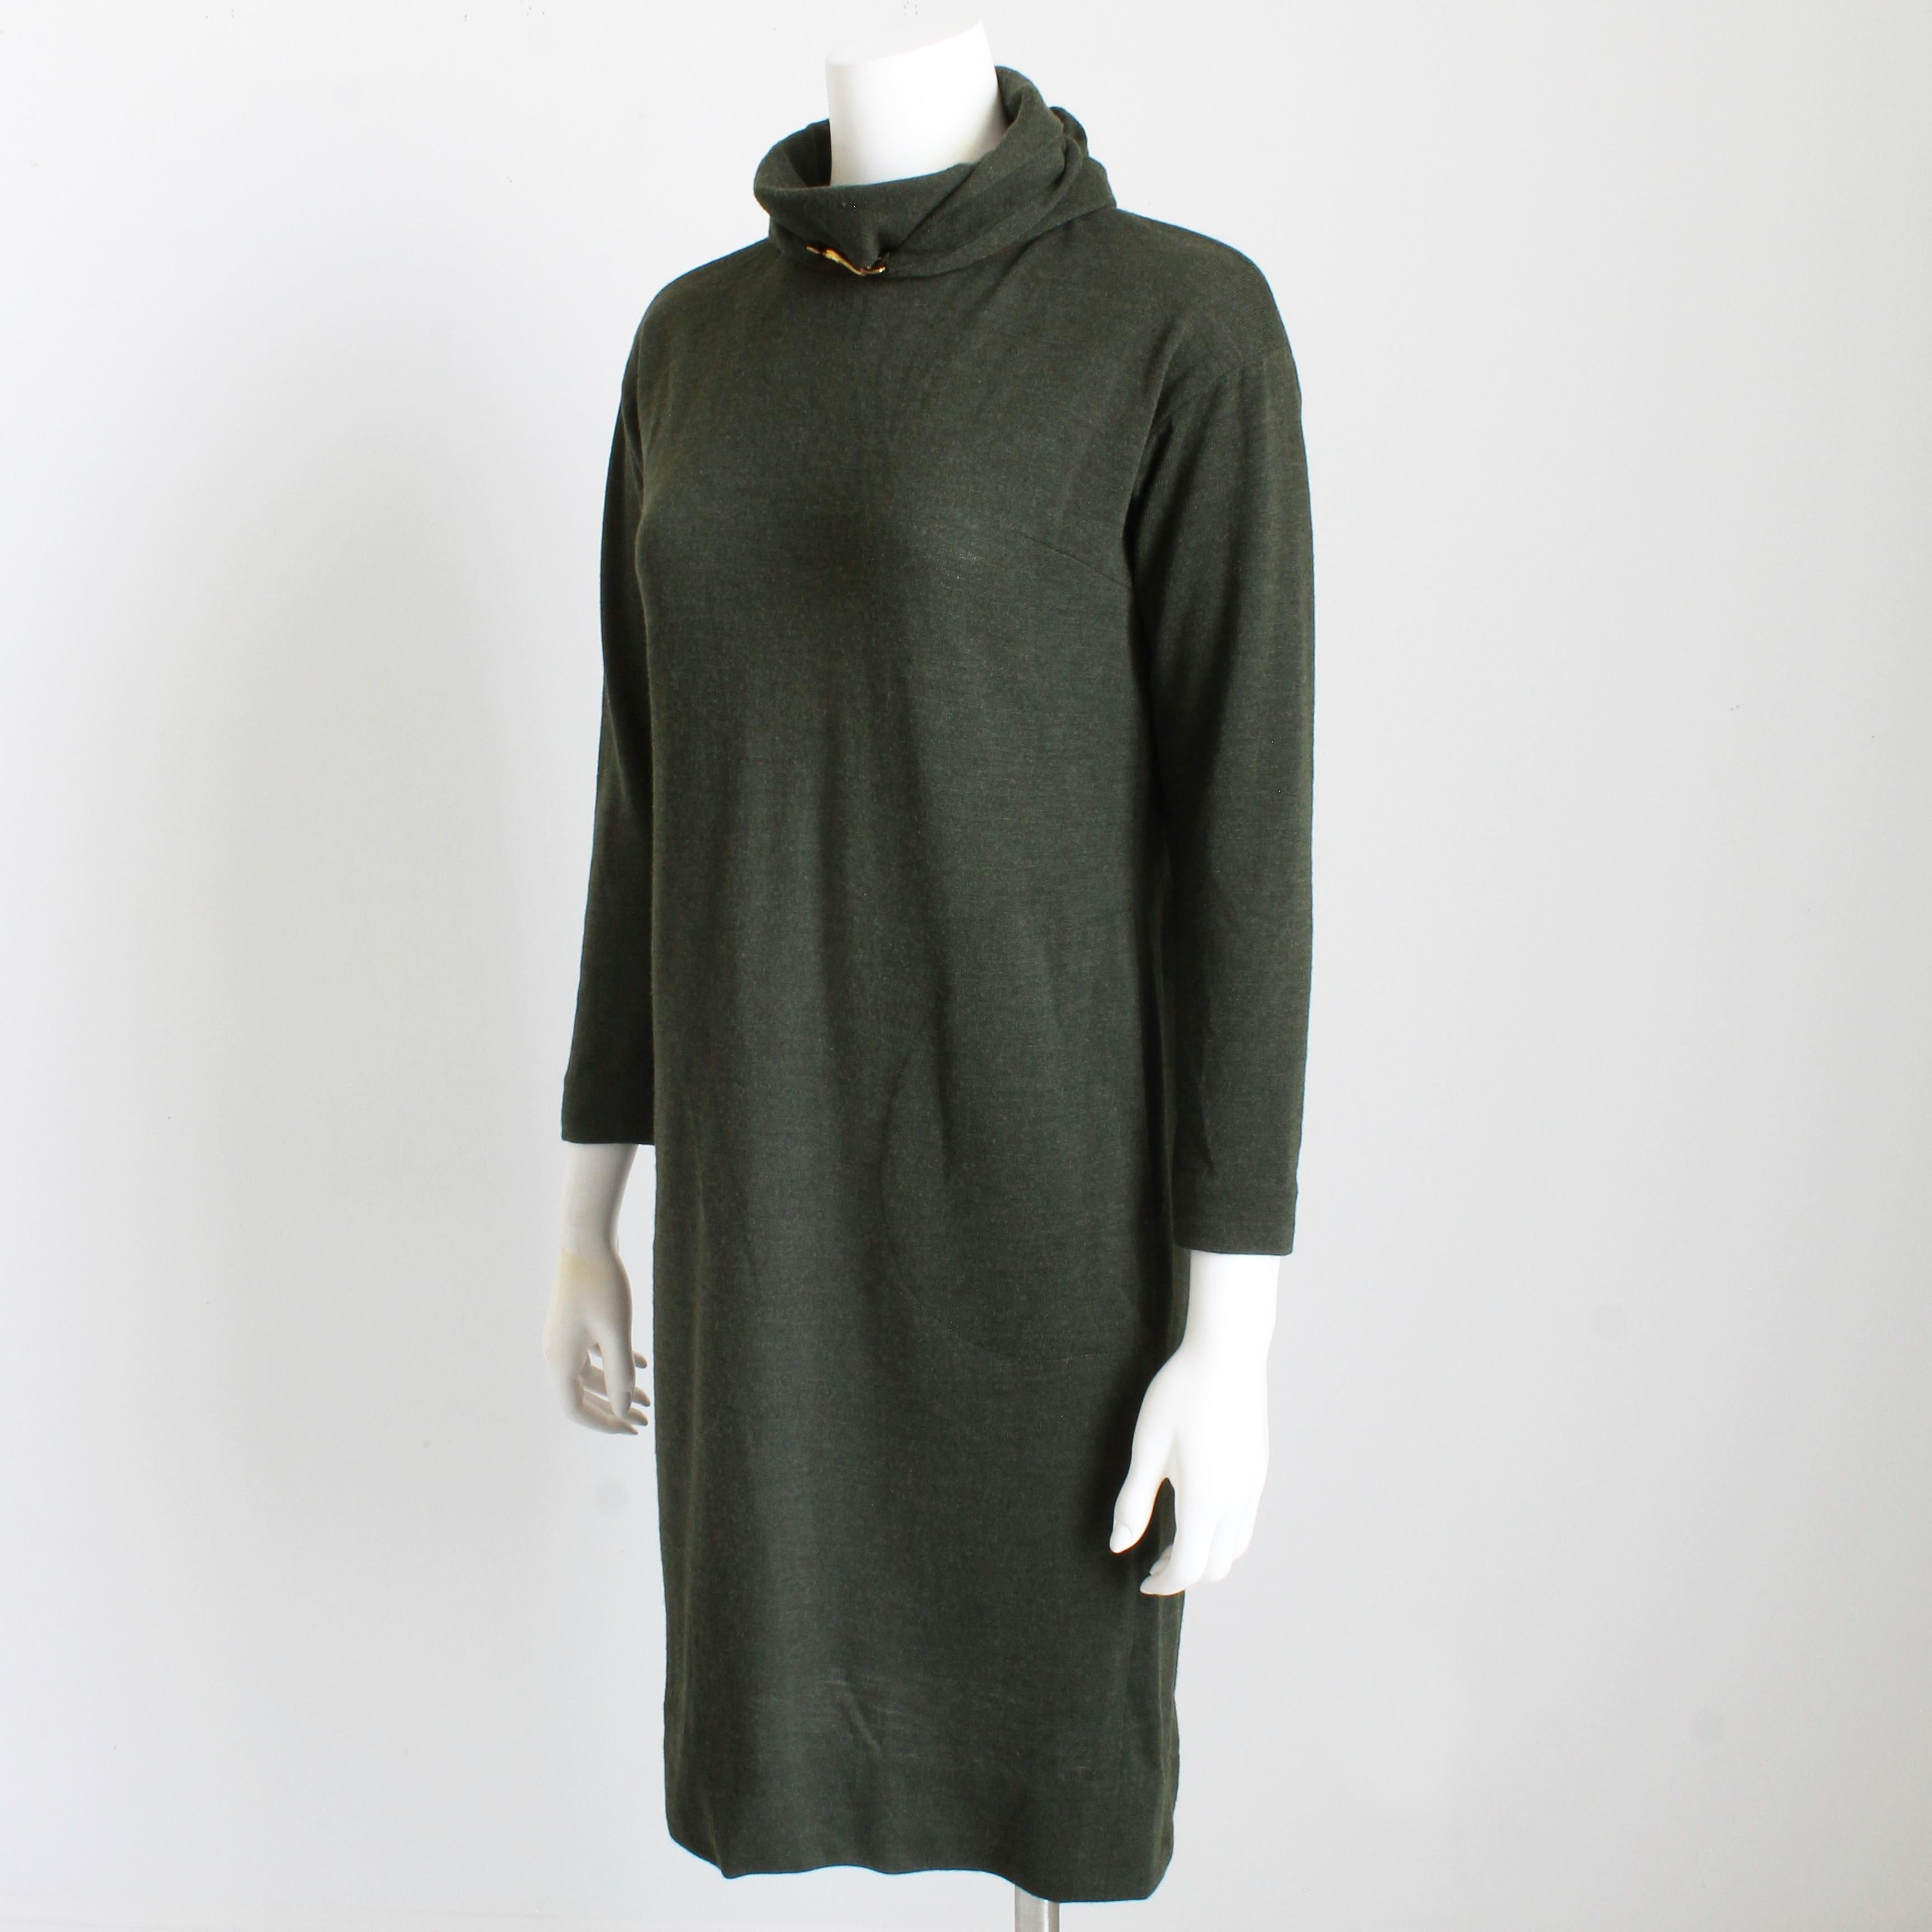 Bonnie Cashin for Sills Wool Knit Dress with Dog Leash Clasp Loden 60s Mod Sz 12 For Sale 3